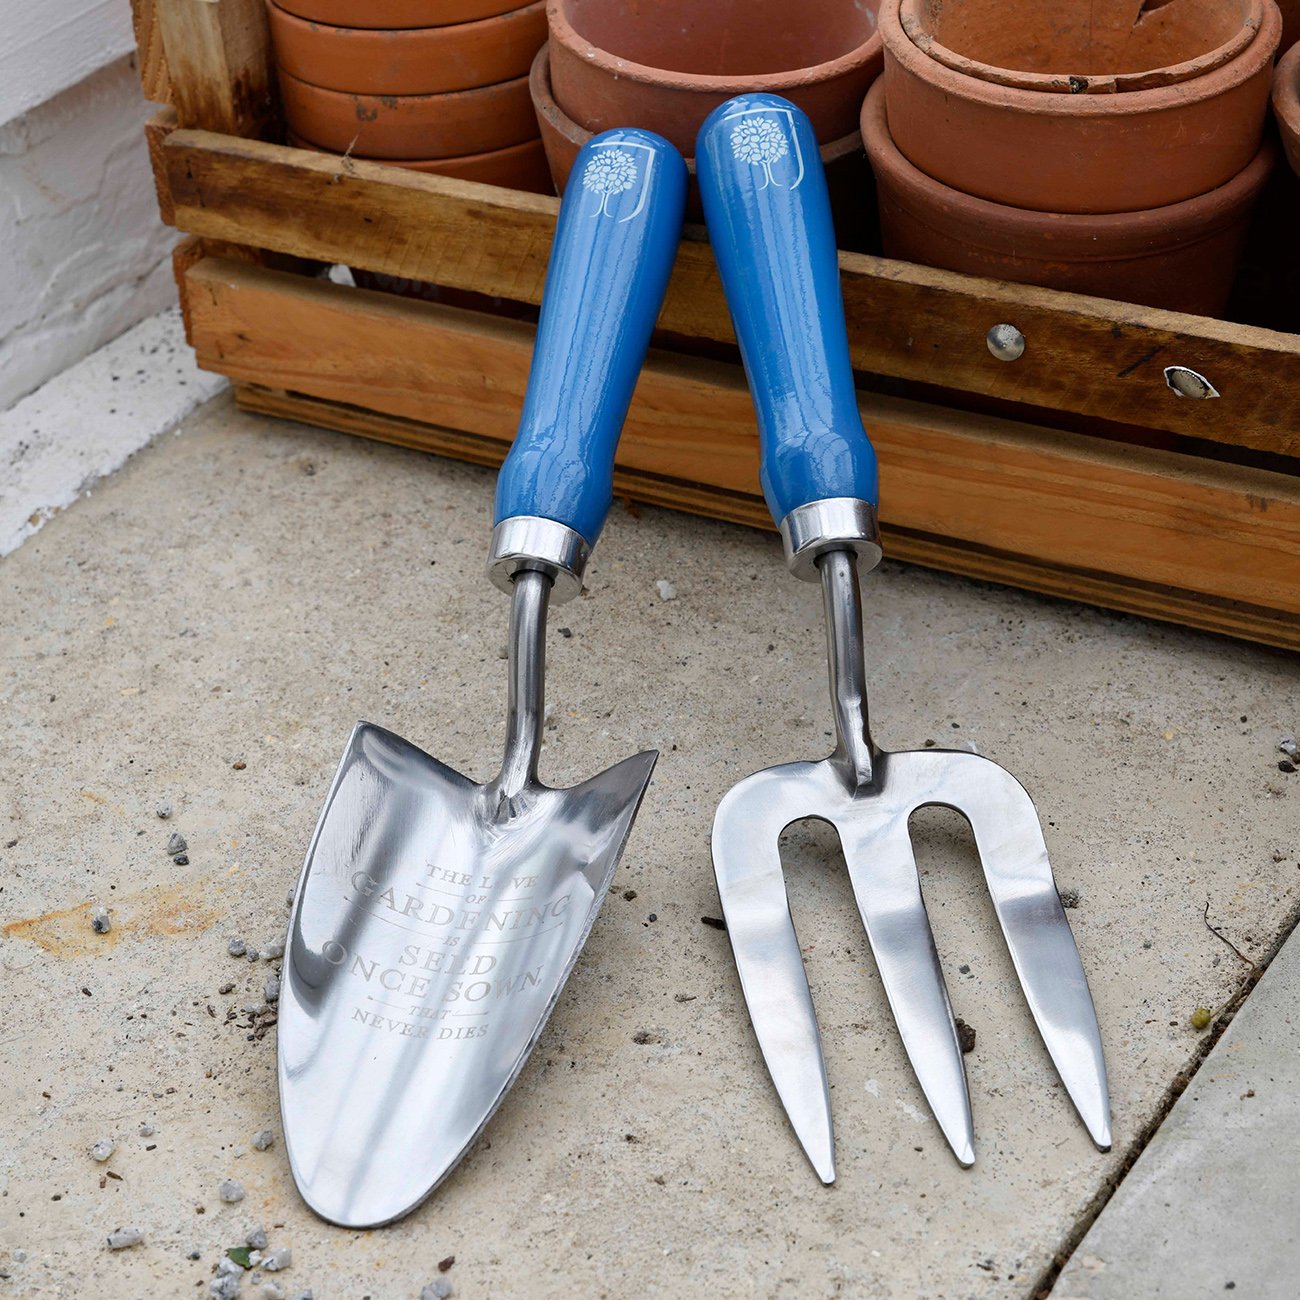 This beautiful gift set of RHS-endorsed trowel and fork makes a simply lovely gift for a gardener.